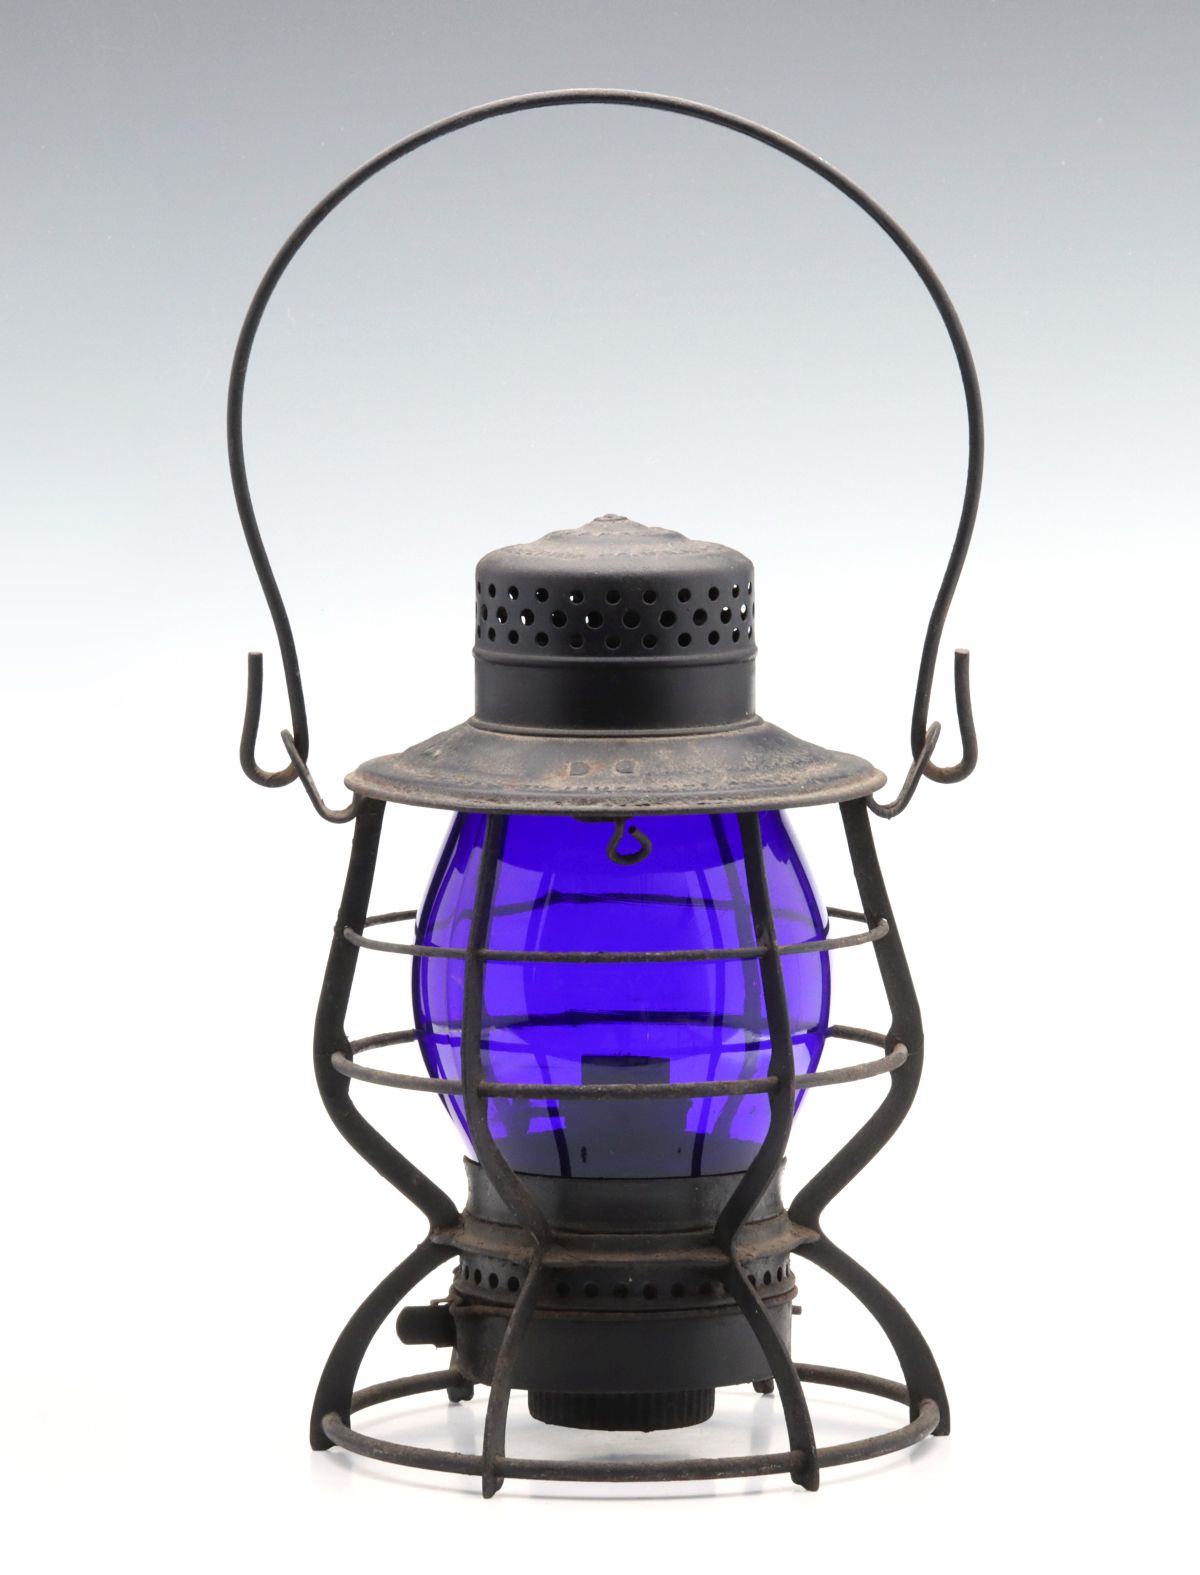 A TALL RAILROAD LANTERN EMBOSSED A.C.L WITH BLUE GLOBE